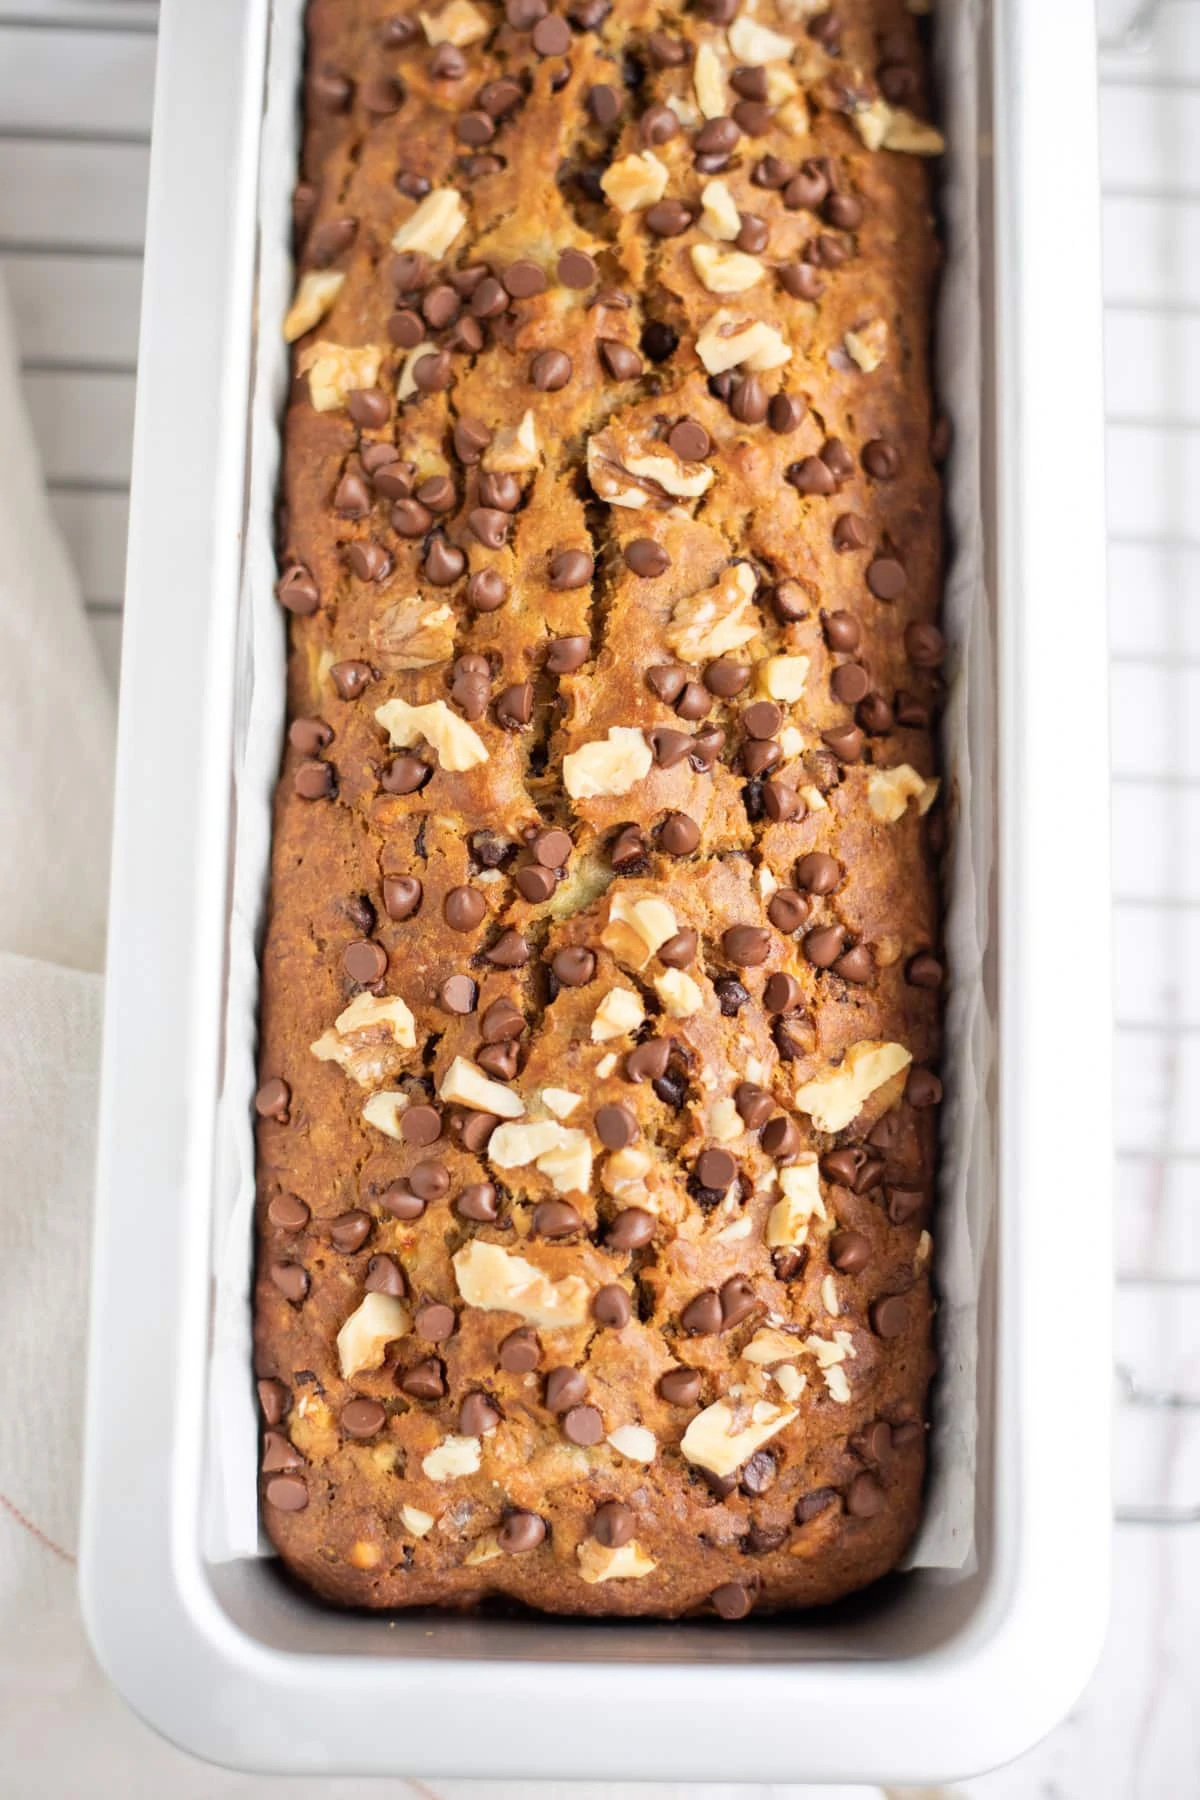 Baked Bread in a baking pan topped with chocolate chips and walnuts 